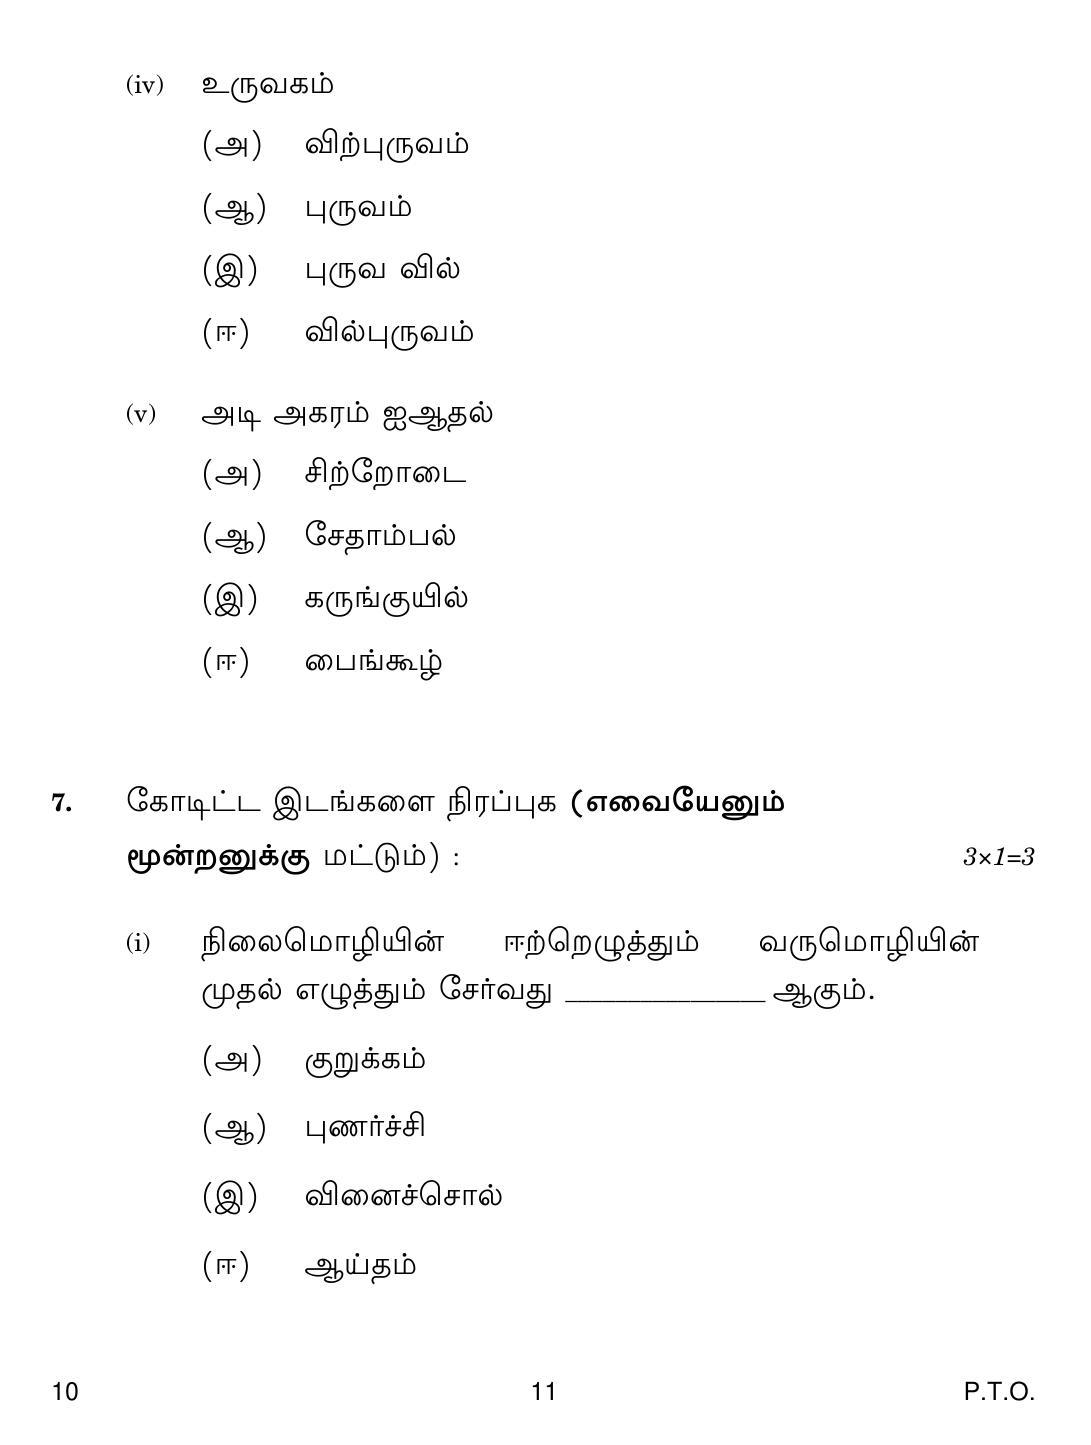 CBSE Class 10 10 Tamil 2019 Question Paper - Page 11